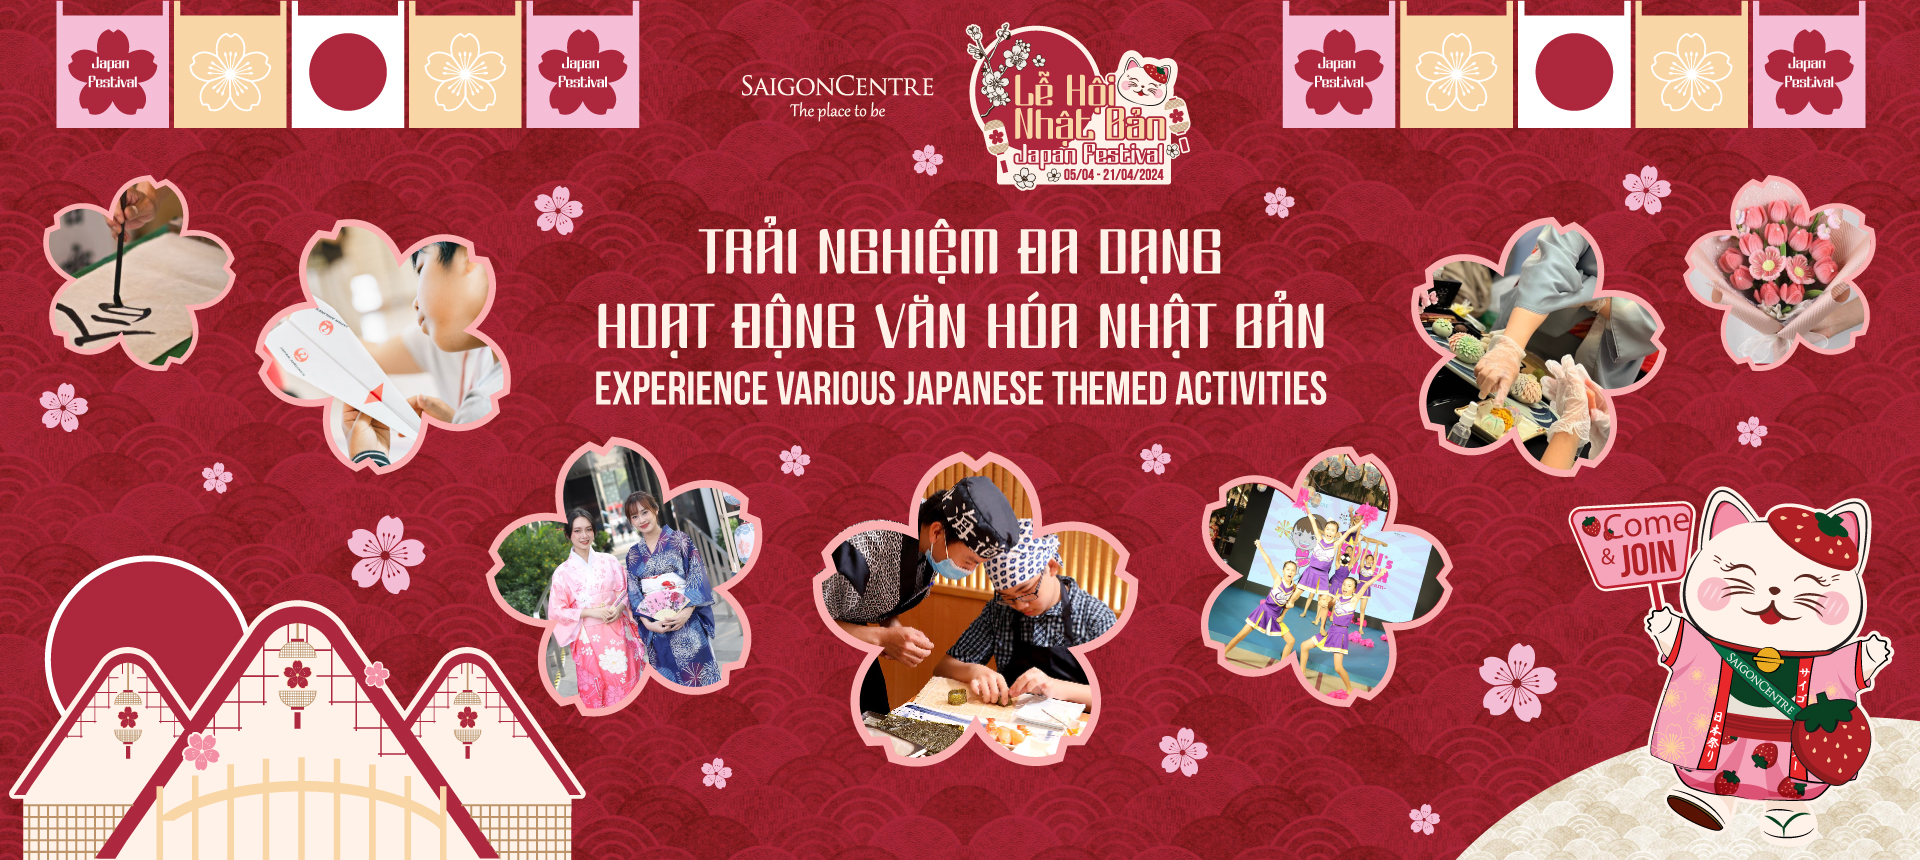 EXPERIENCE VARIOUS JAPANESE THEMED ACTIVATIES